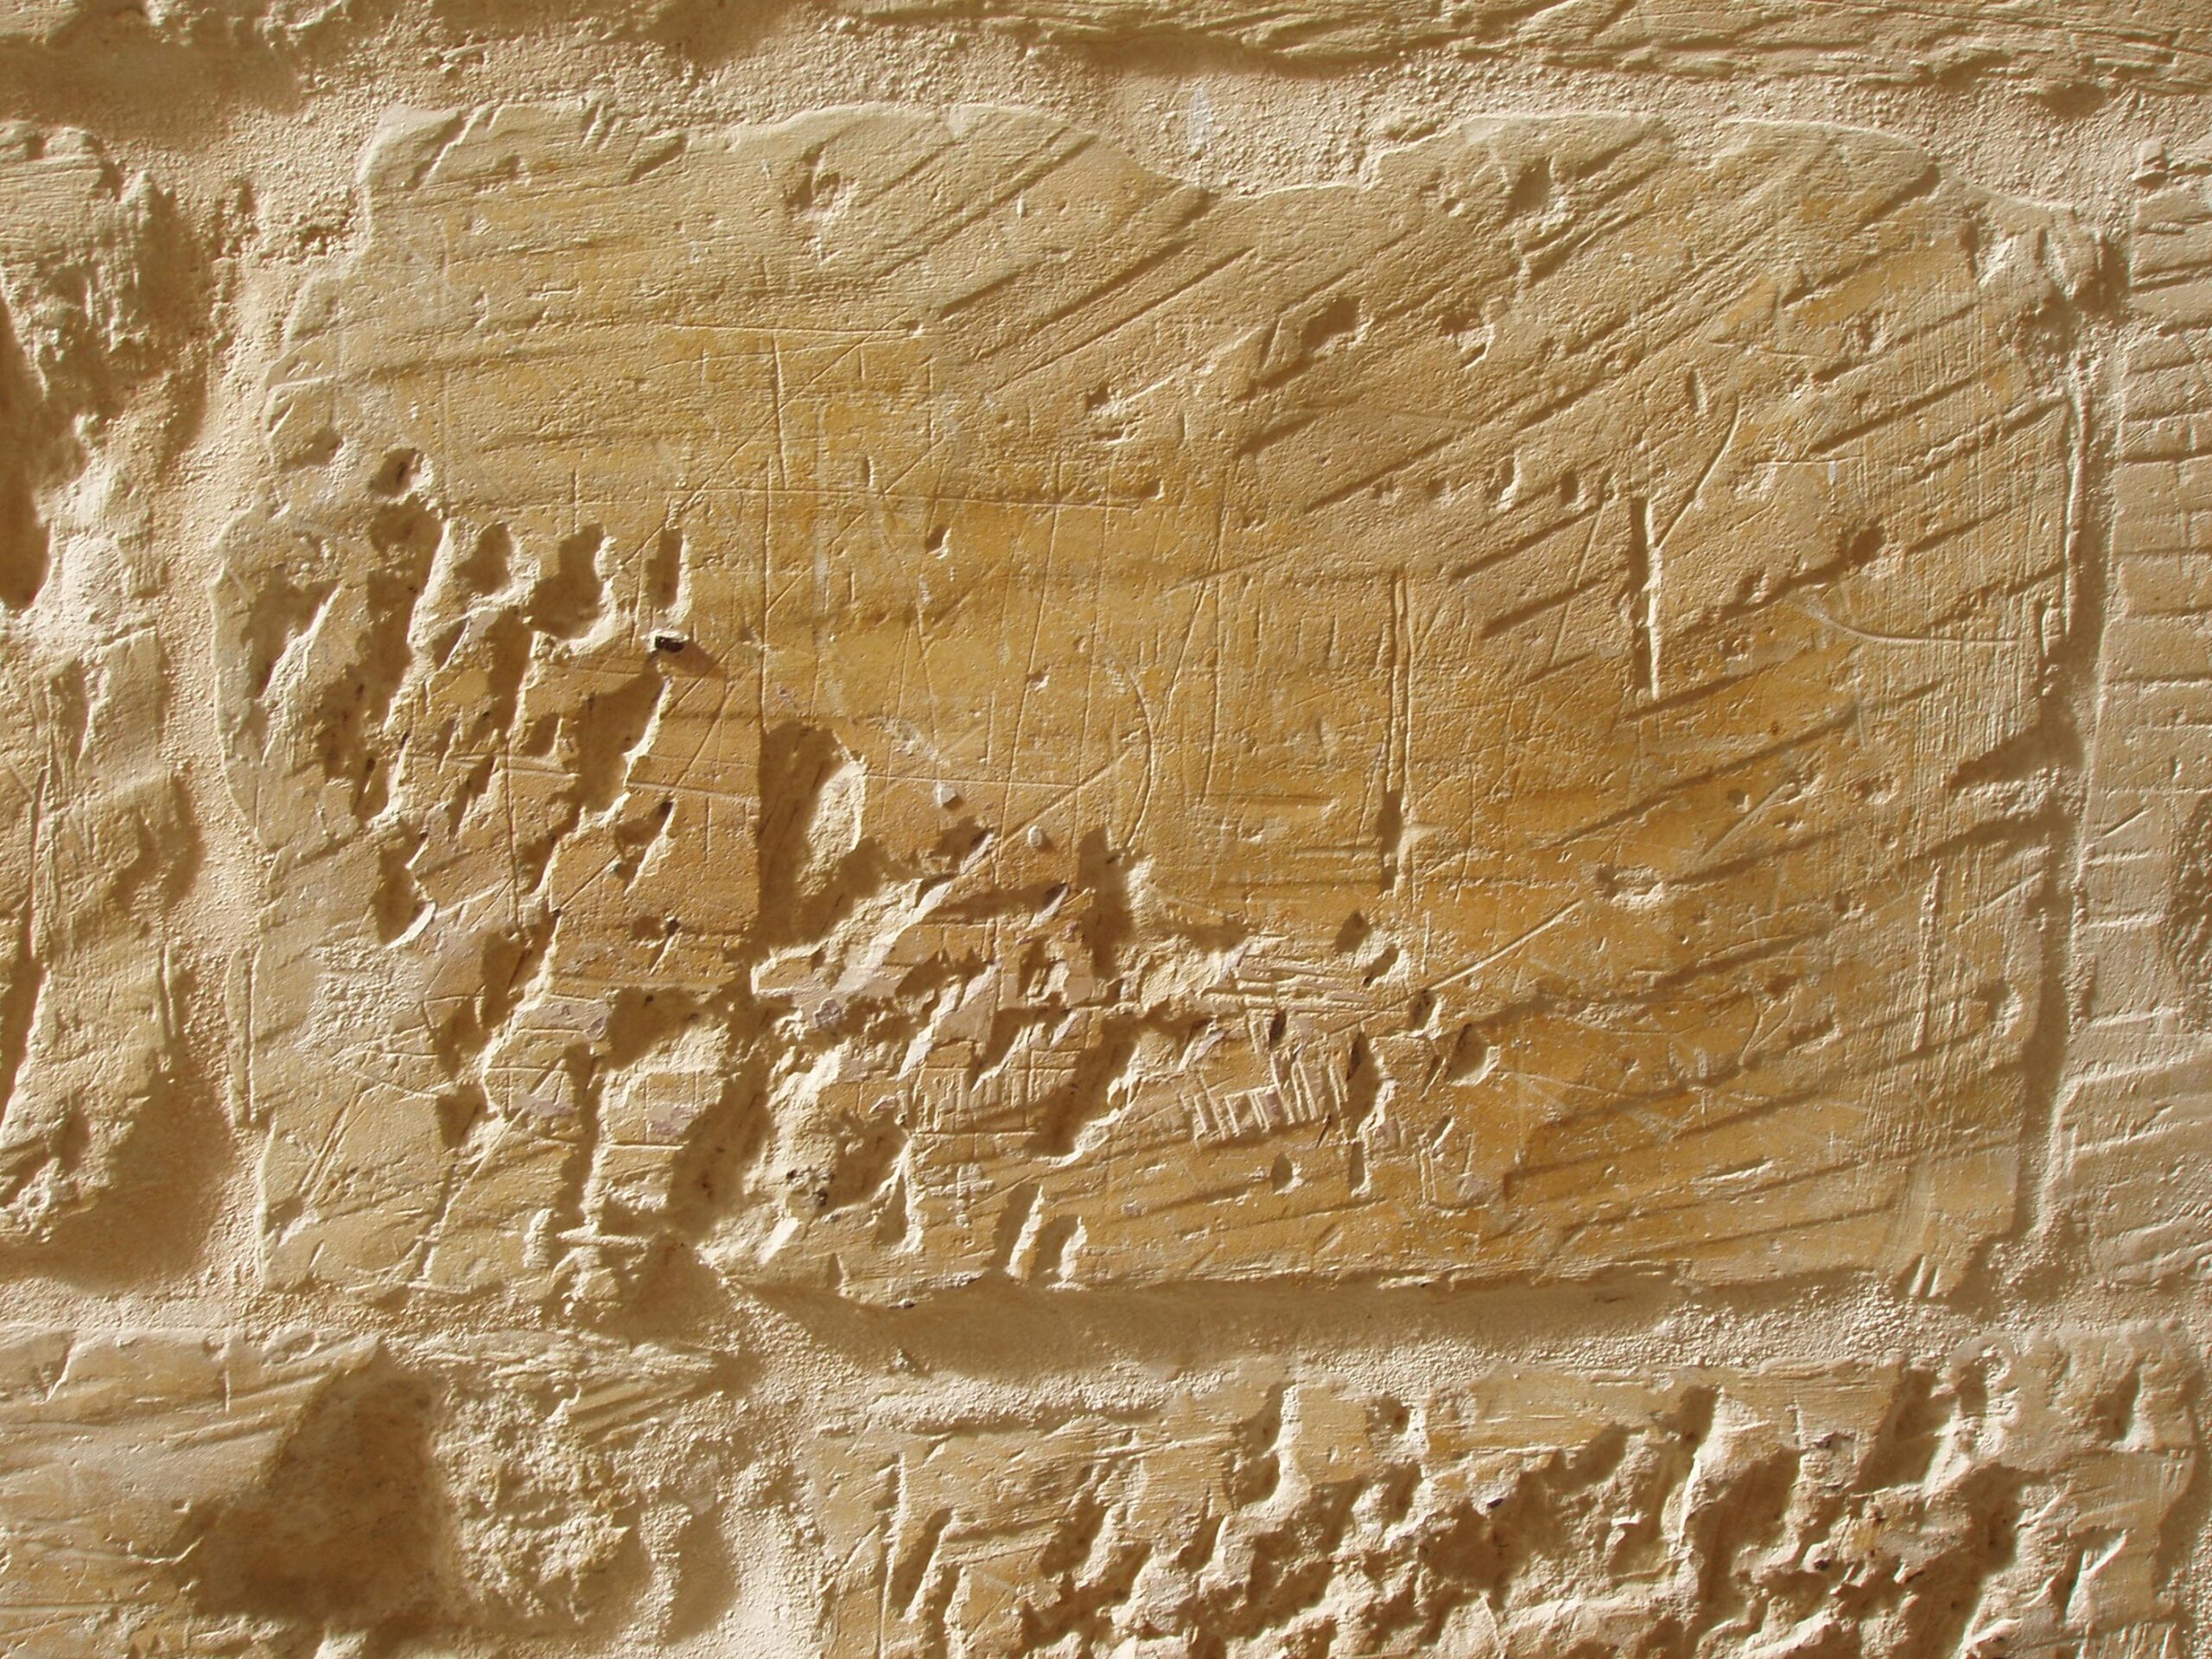 A defaced ship graffito, identified only by the ship’s hull.